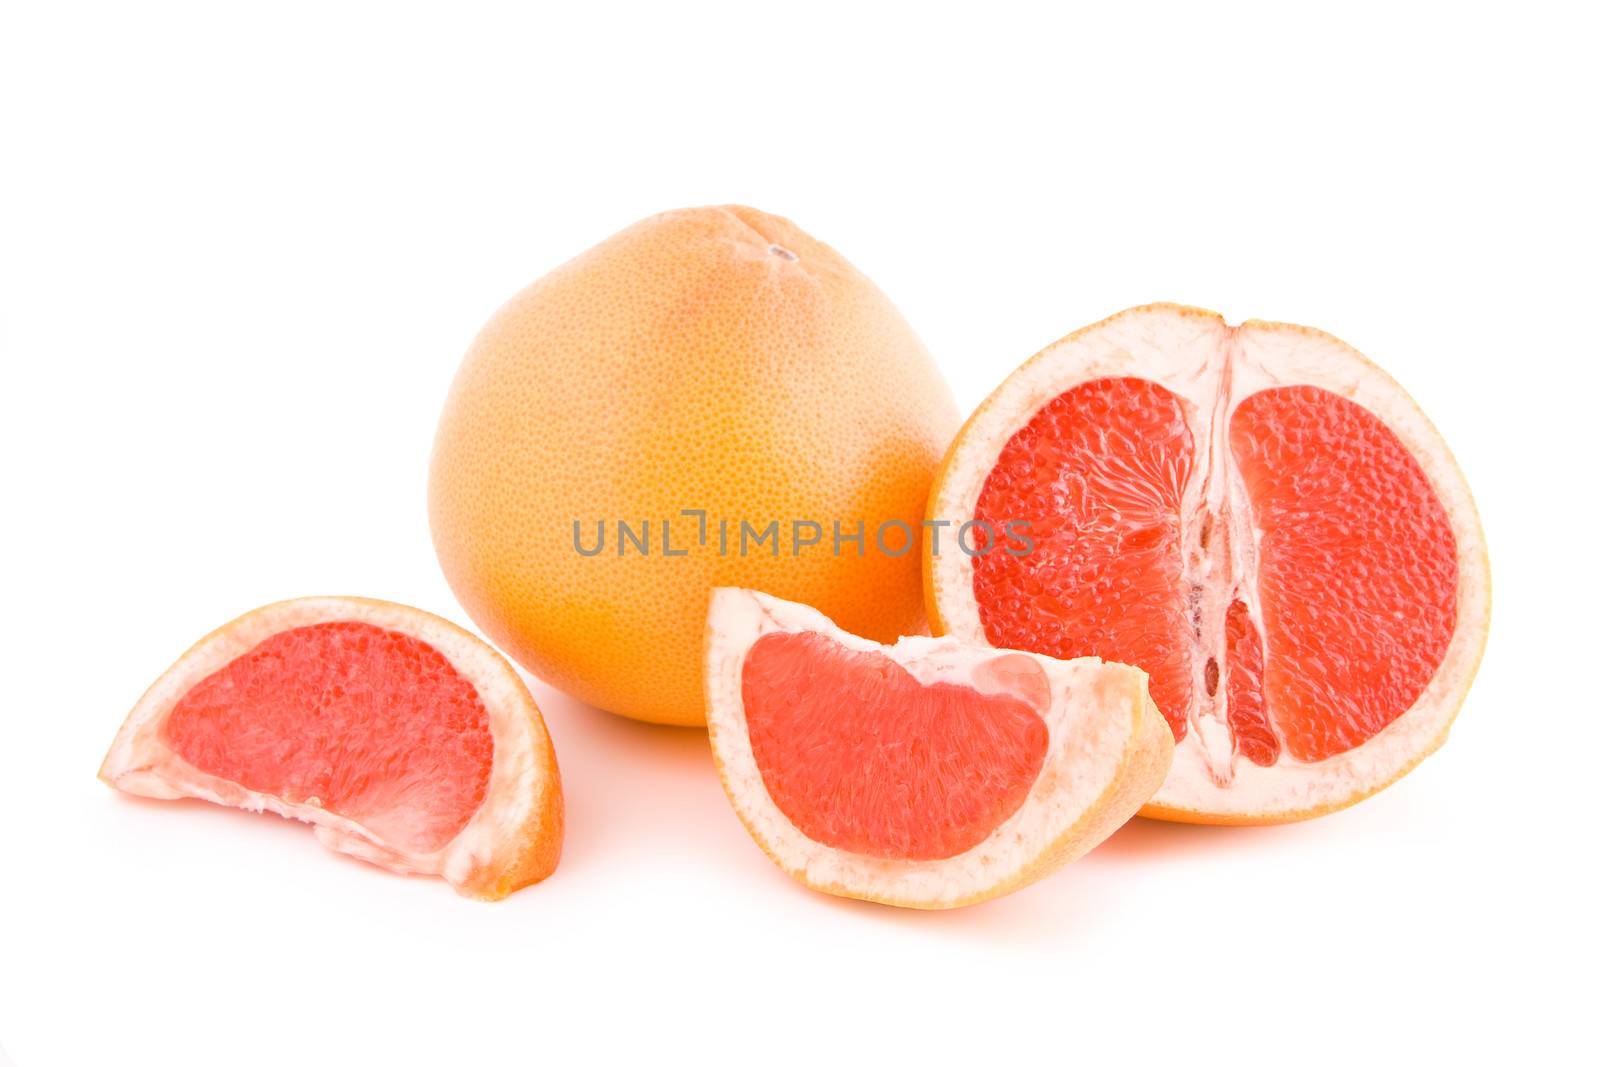 Red grapefruits parts by Gbuglok